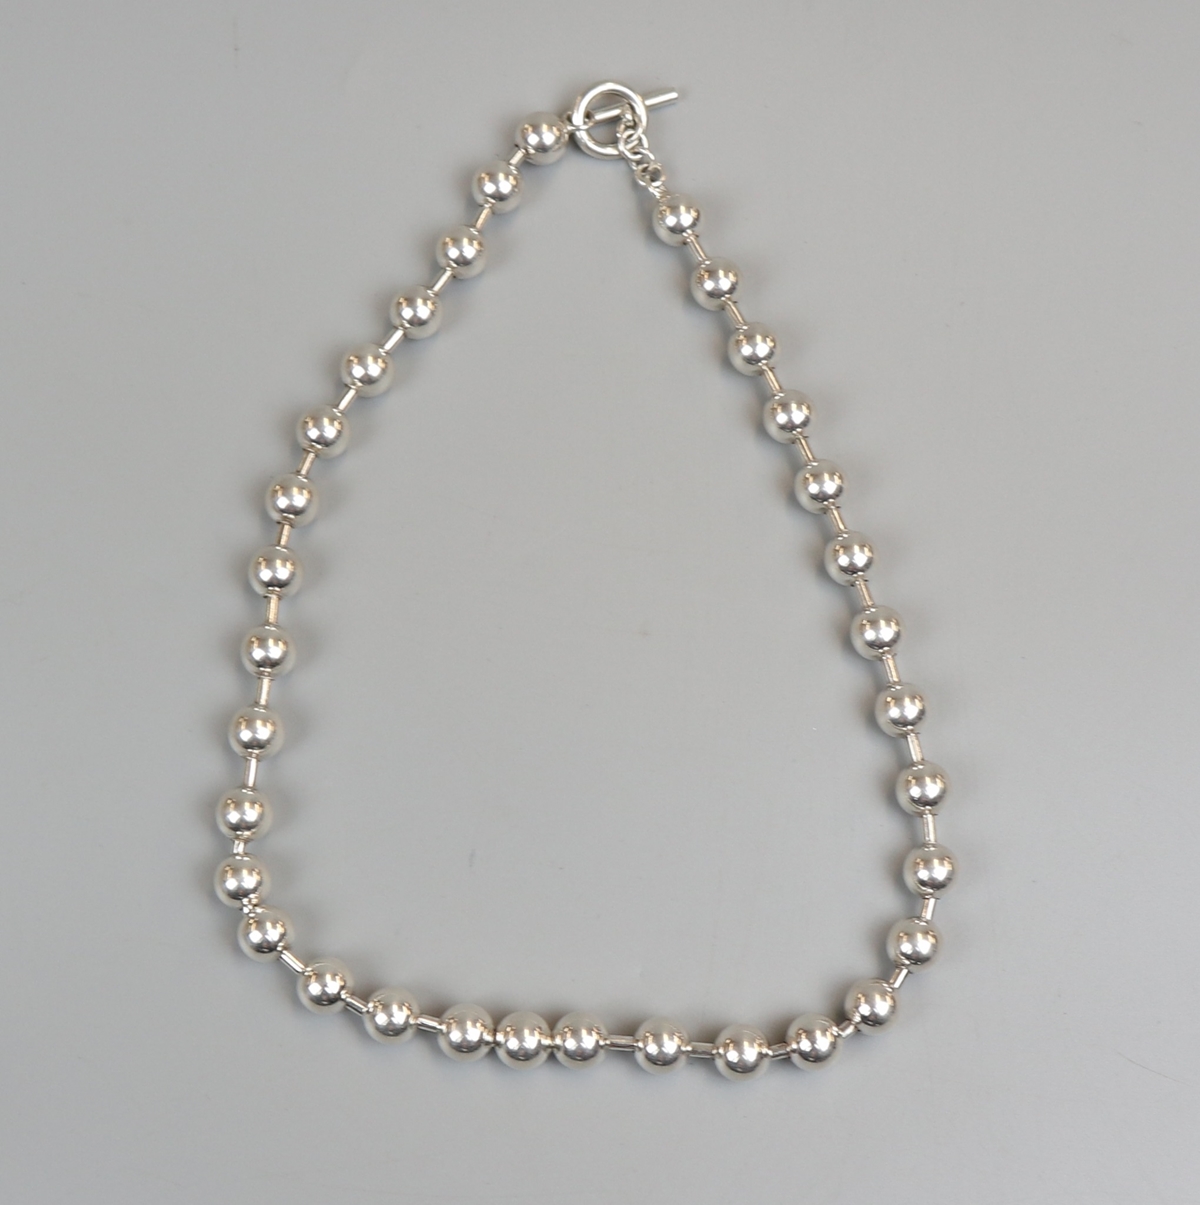 Heavy silver beaded necklace